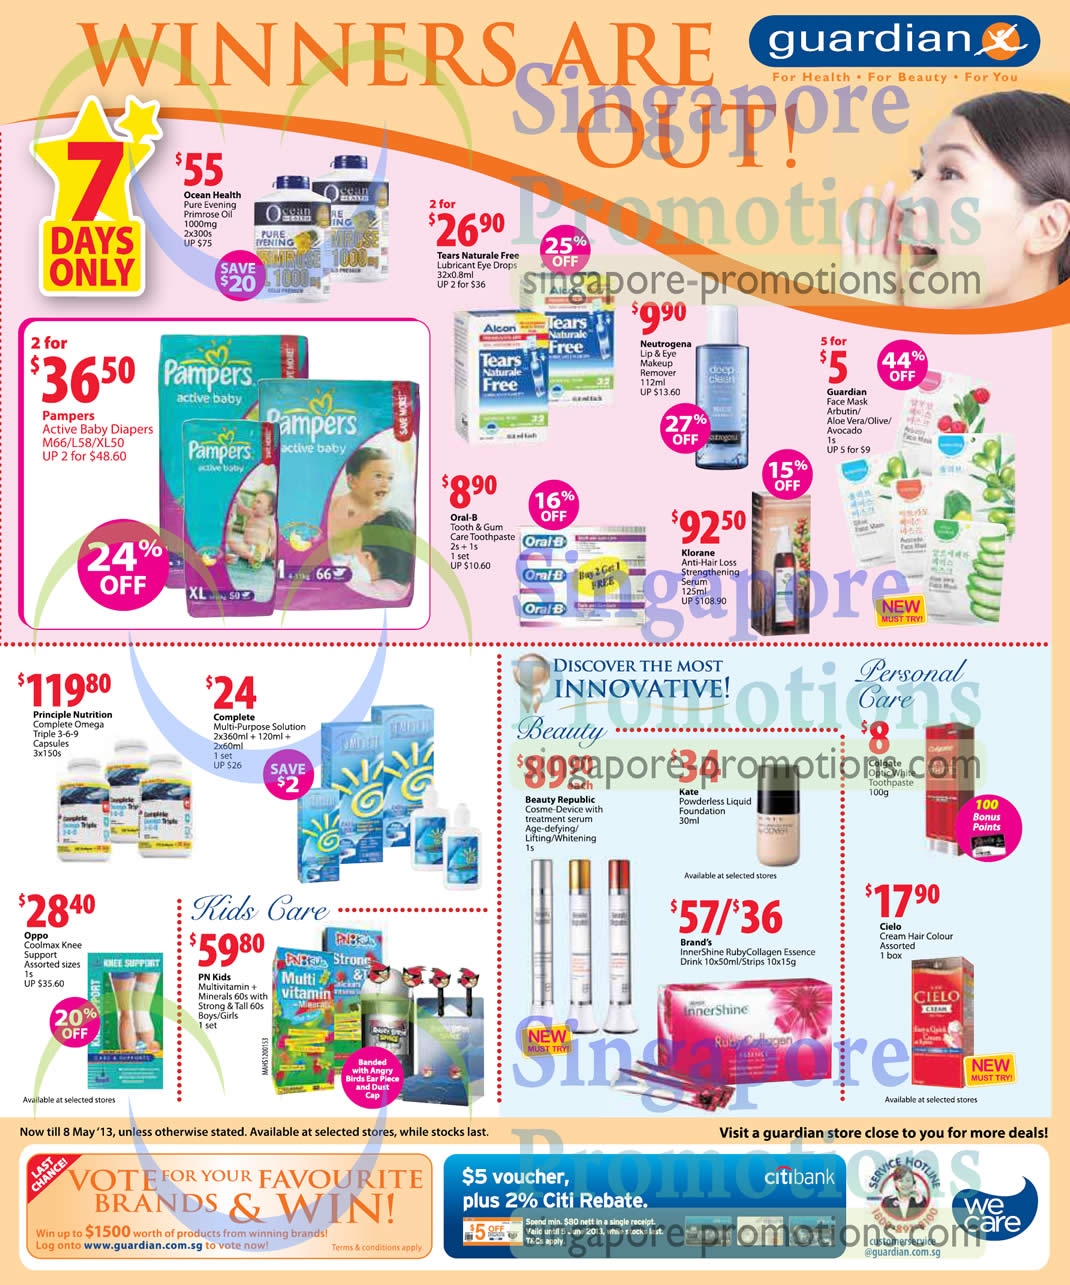 Featured image for Guardian Health, Beauty & Personal Care Offers 2 - 8 May 2013